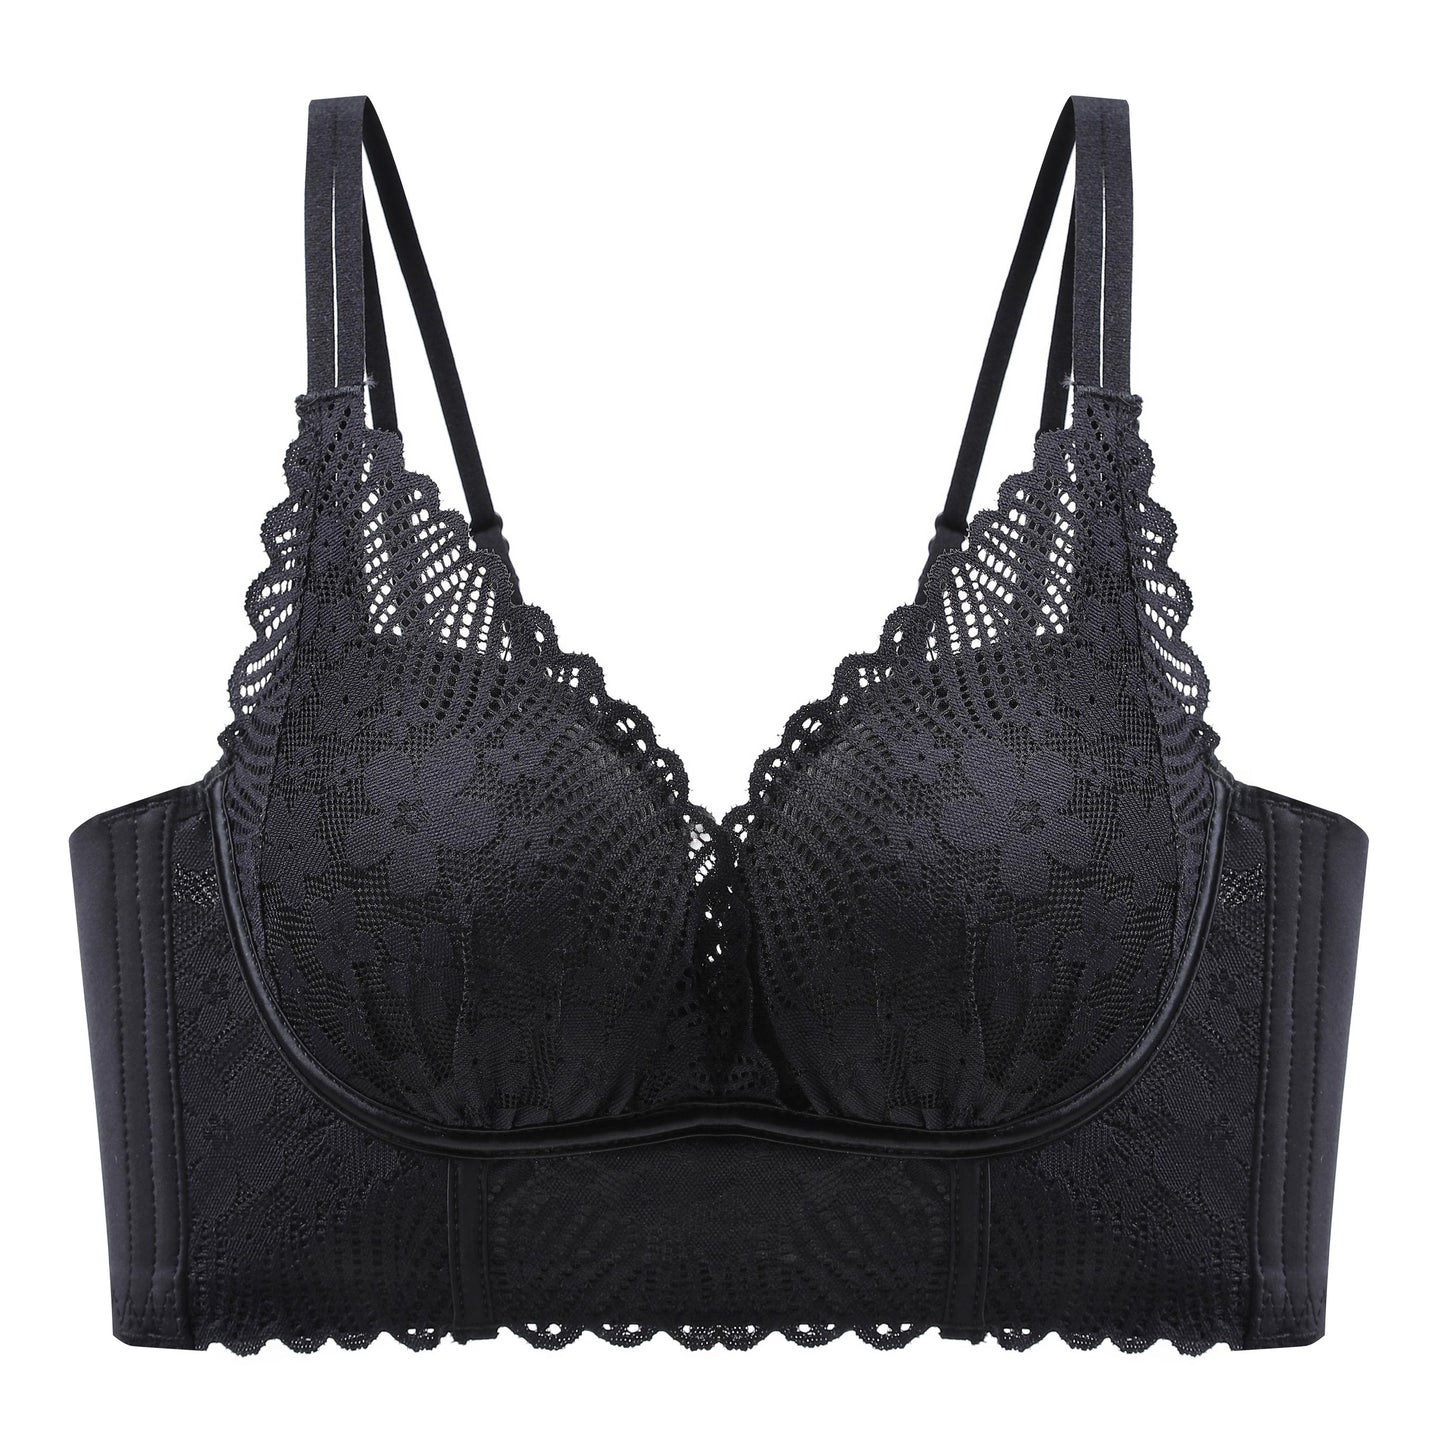 Small Chest Gather  Lace Bra Adjustable Sexy Bra High Qualily Seamless Bra Thin Without Rims Miiow Cotton Cotton